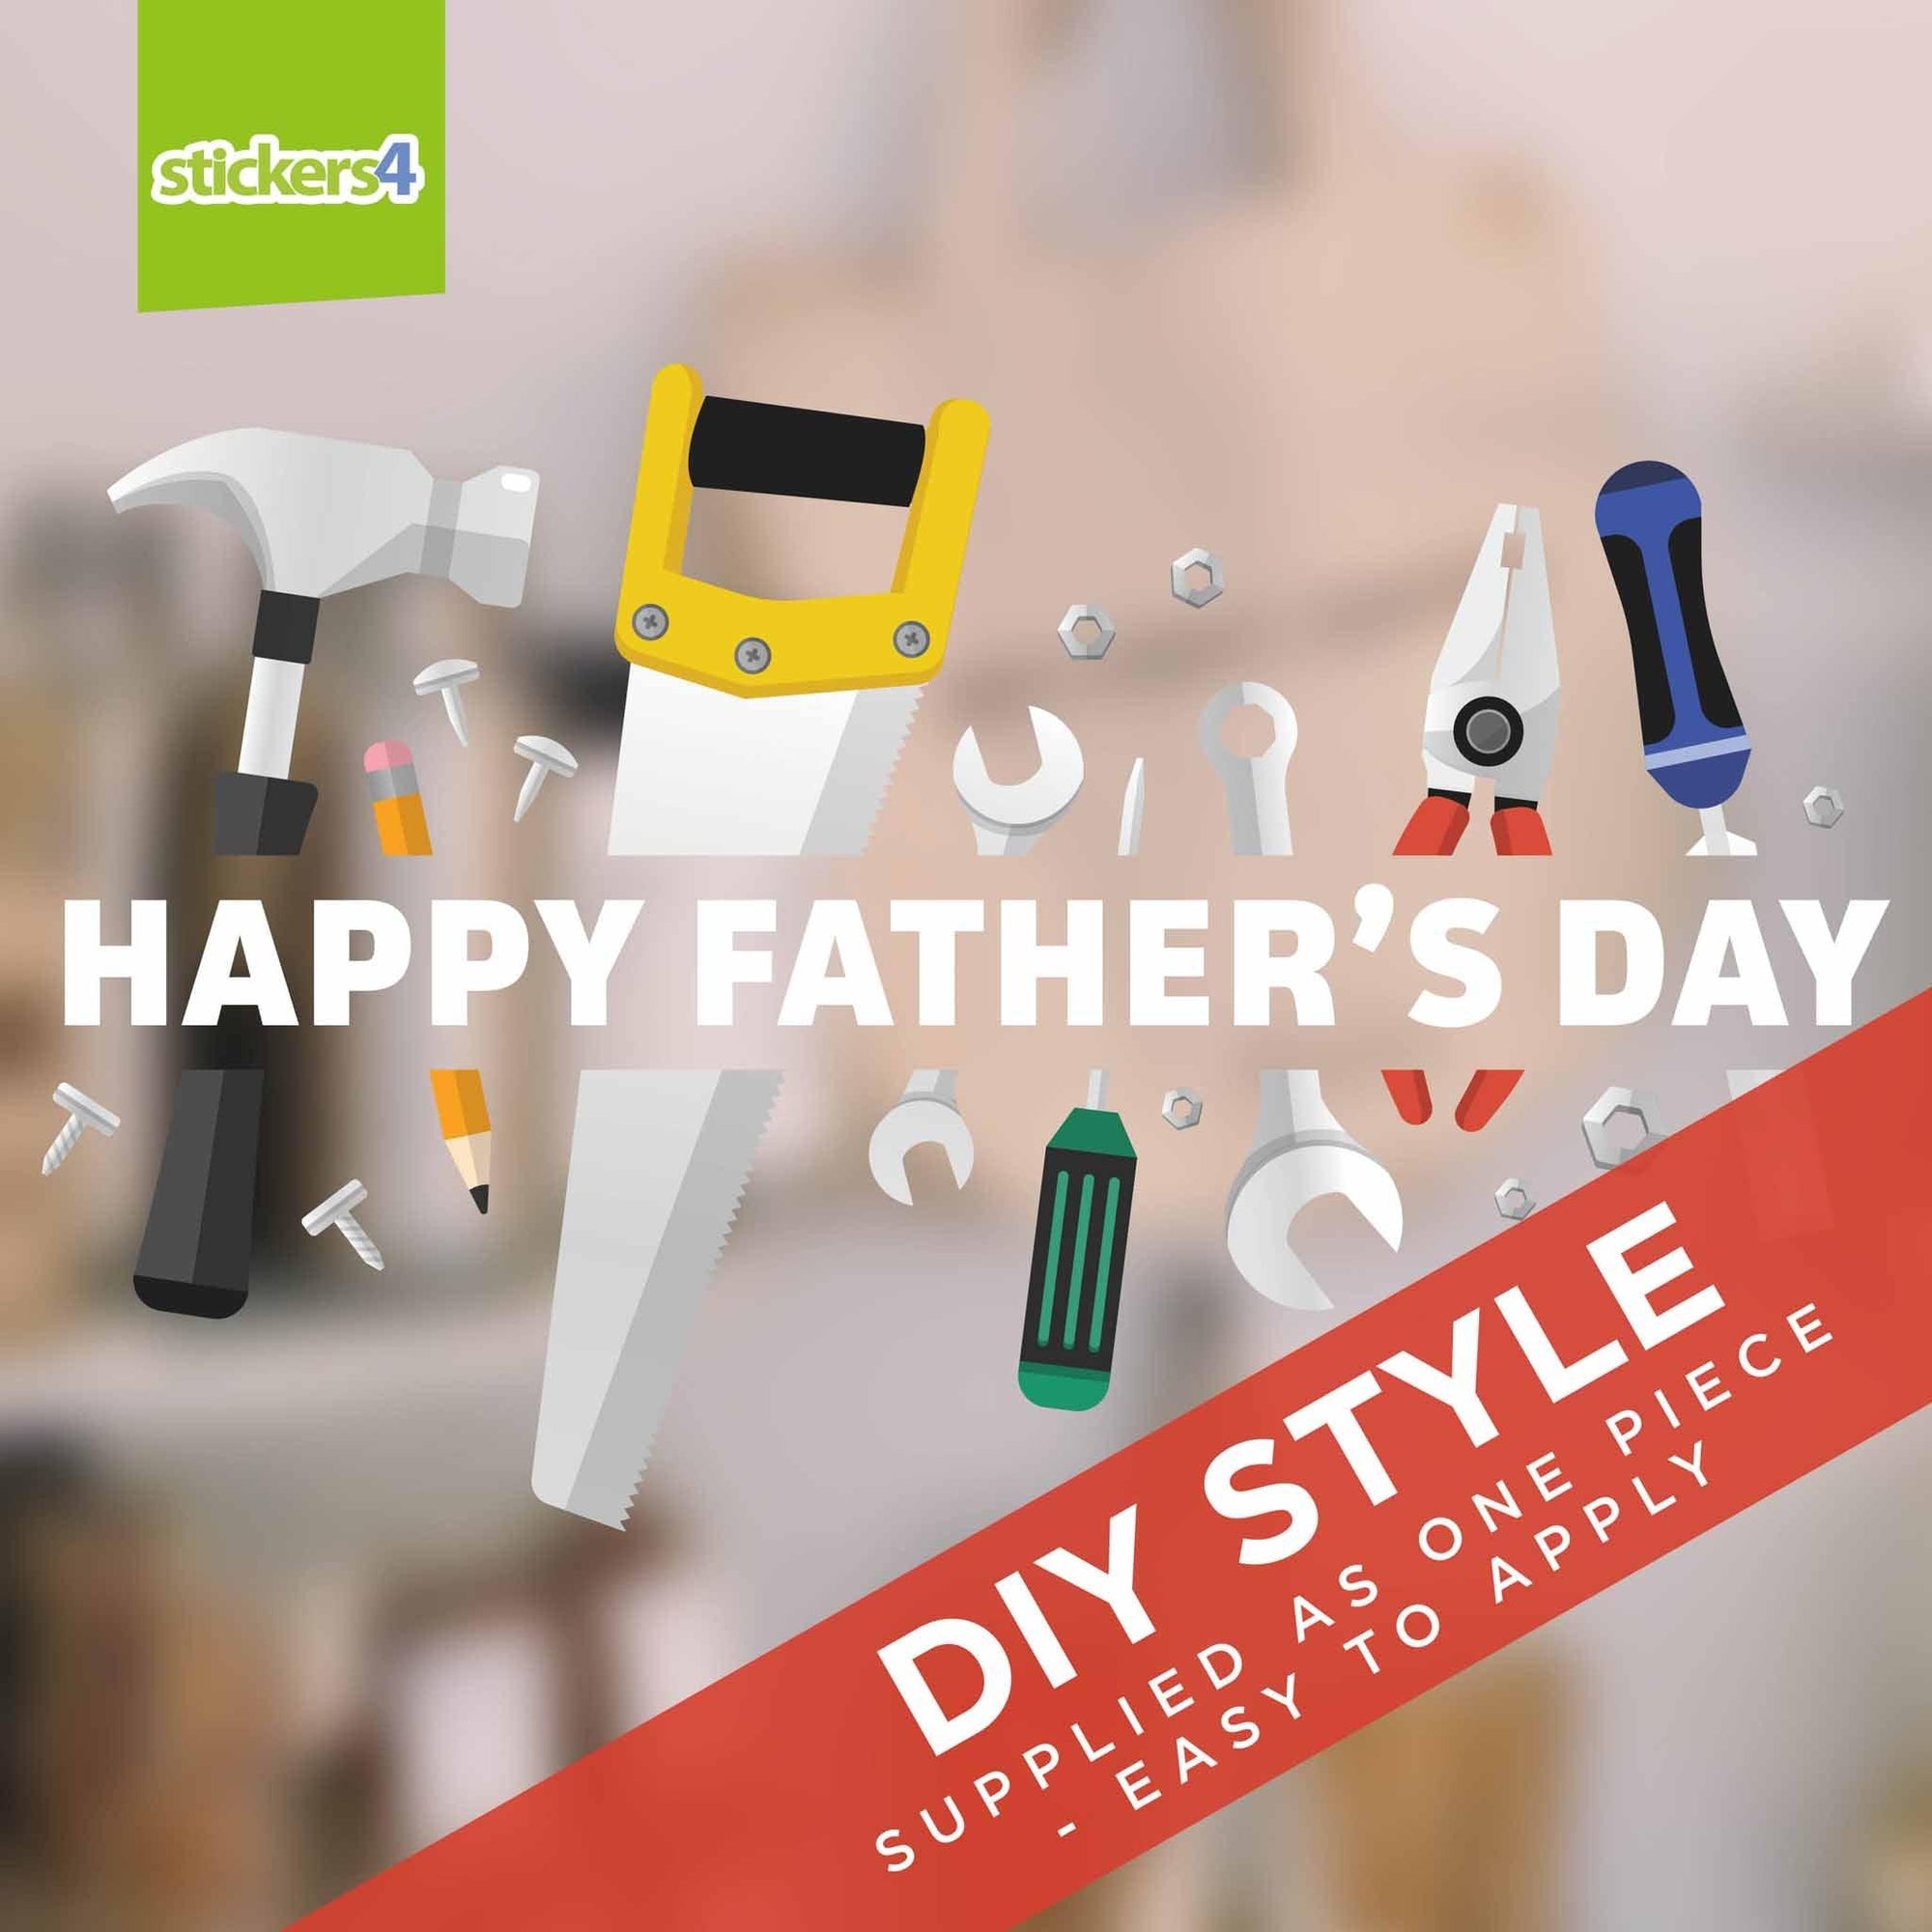 Happy Father's Day with Tools Window Sticker Father's Day Window Display